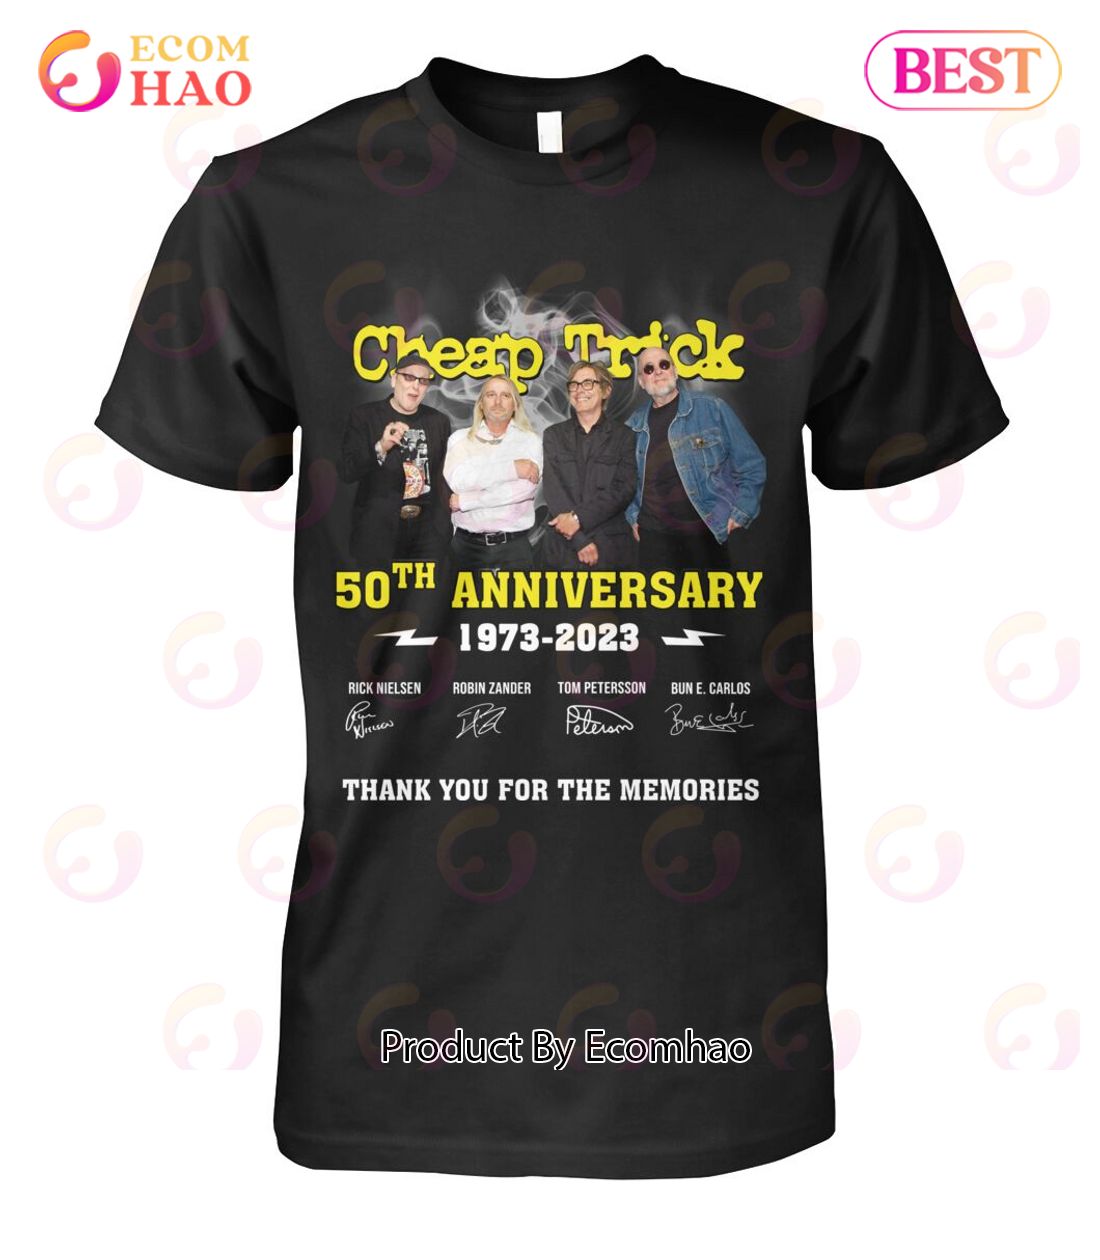 Cheap Trick 50th Anniversary 1973 – 2023 Thank You For The Memories T-Shirt